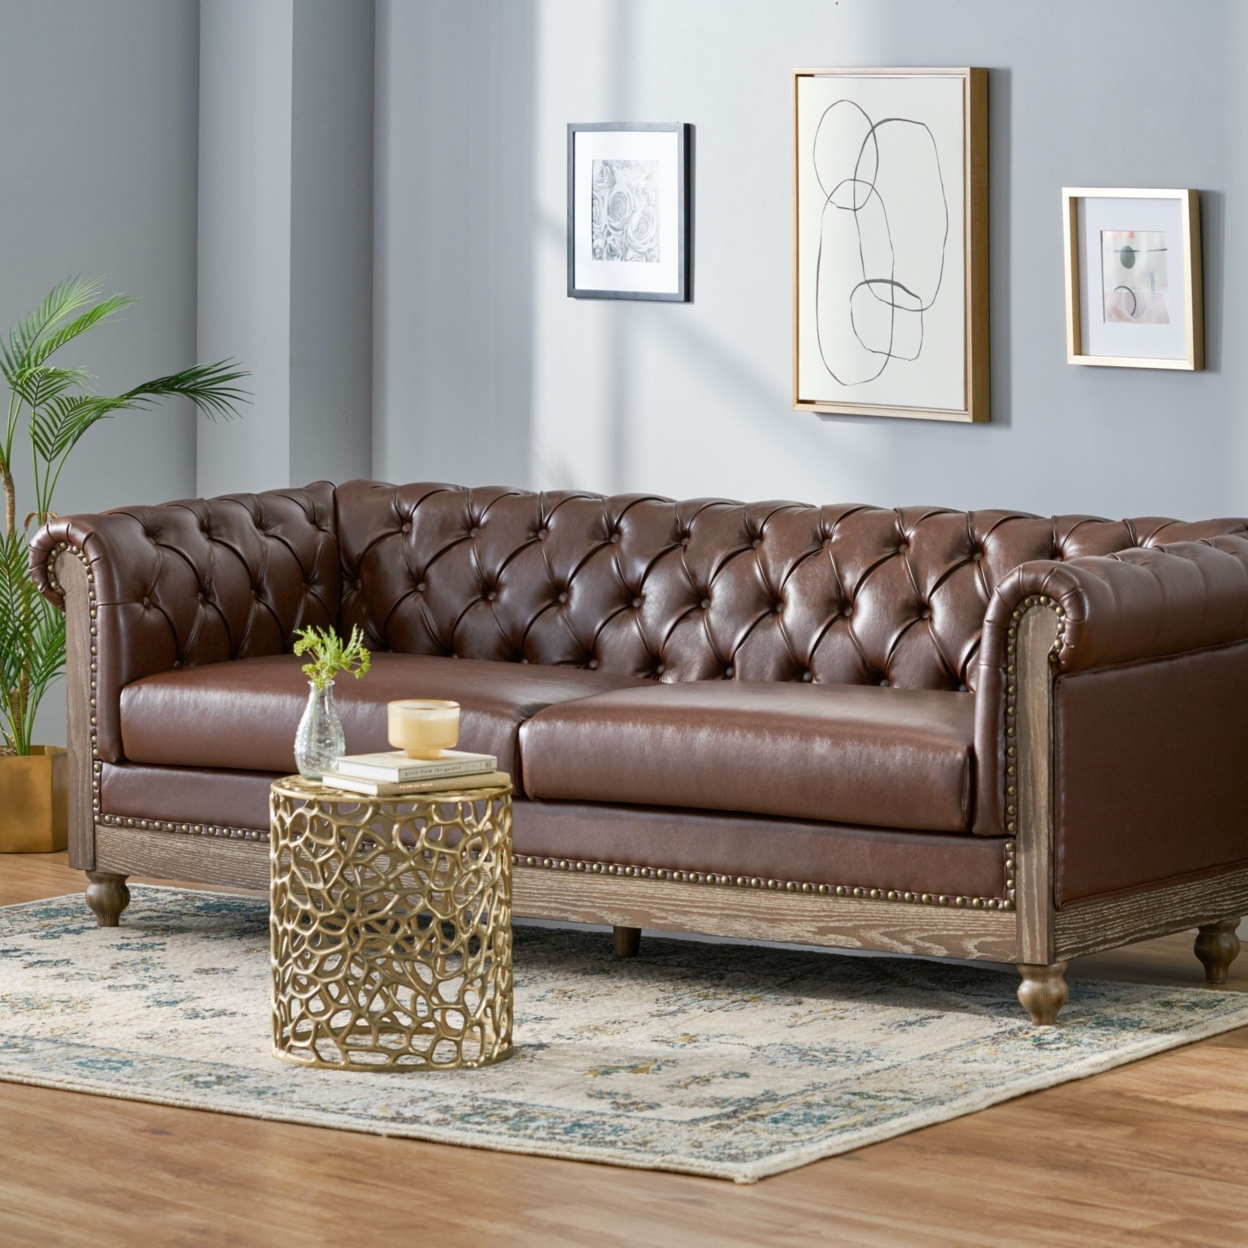 Kinzie Chesterfield Tufted 3 Seater Sofa With Nailhead Trim - Dark Brown